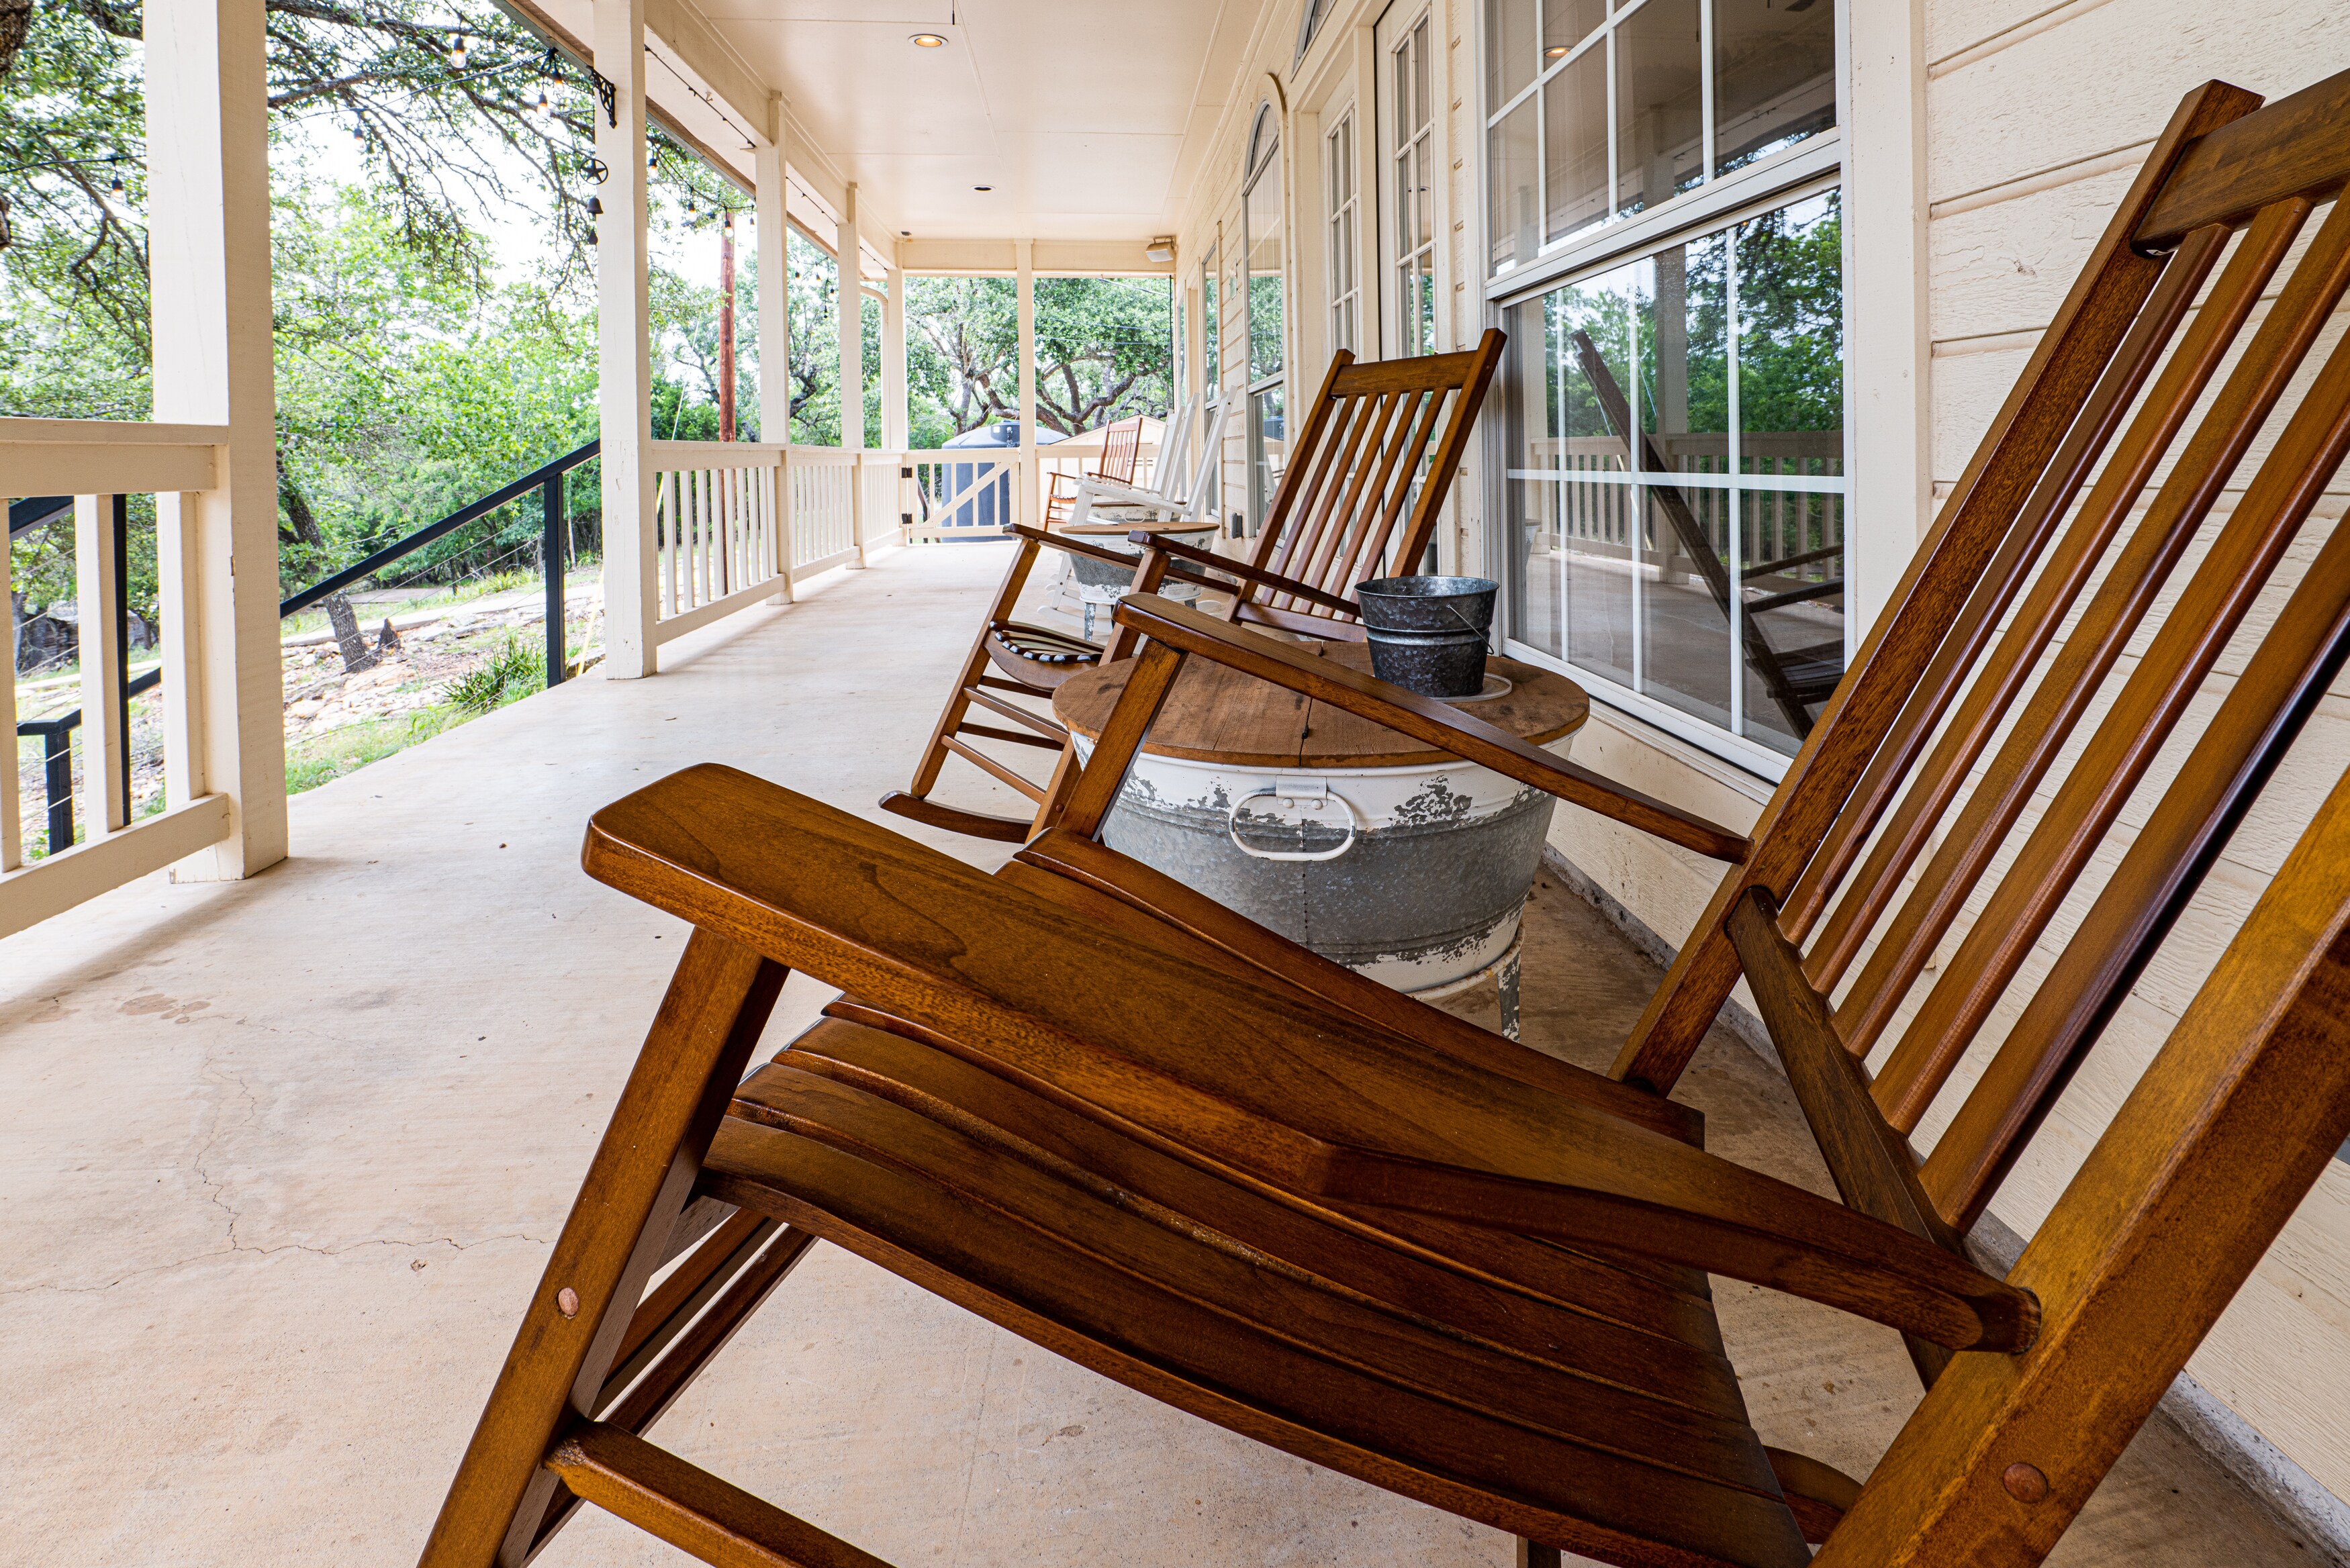 Enjoy the view in seating found on the covered porches.